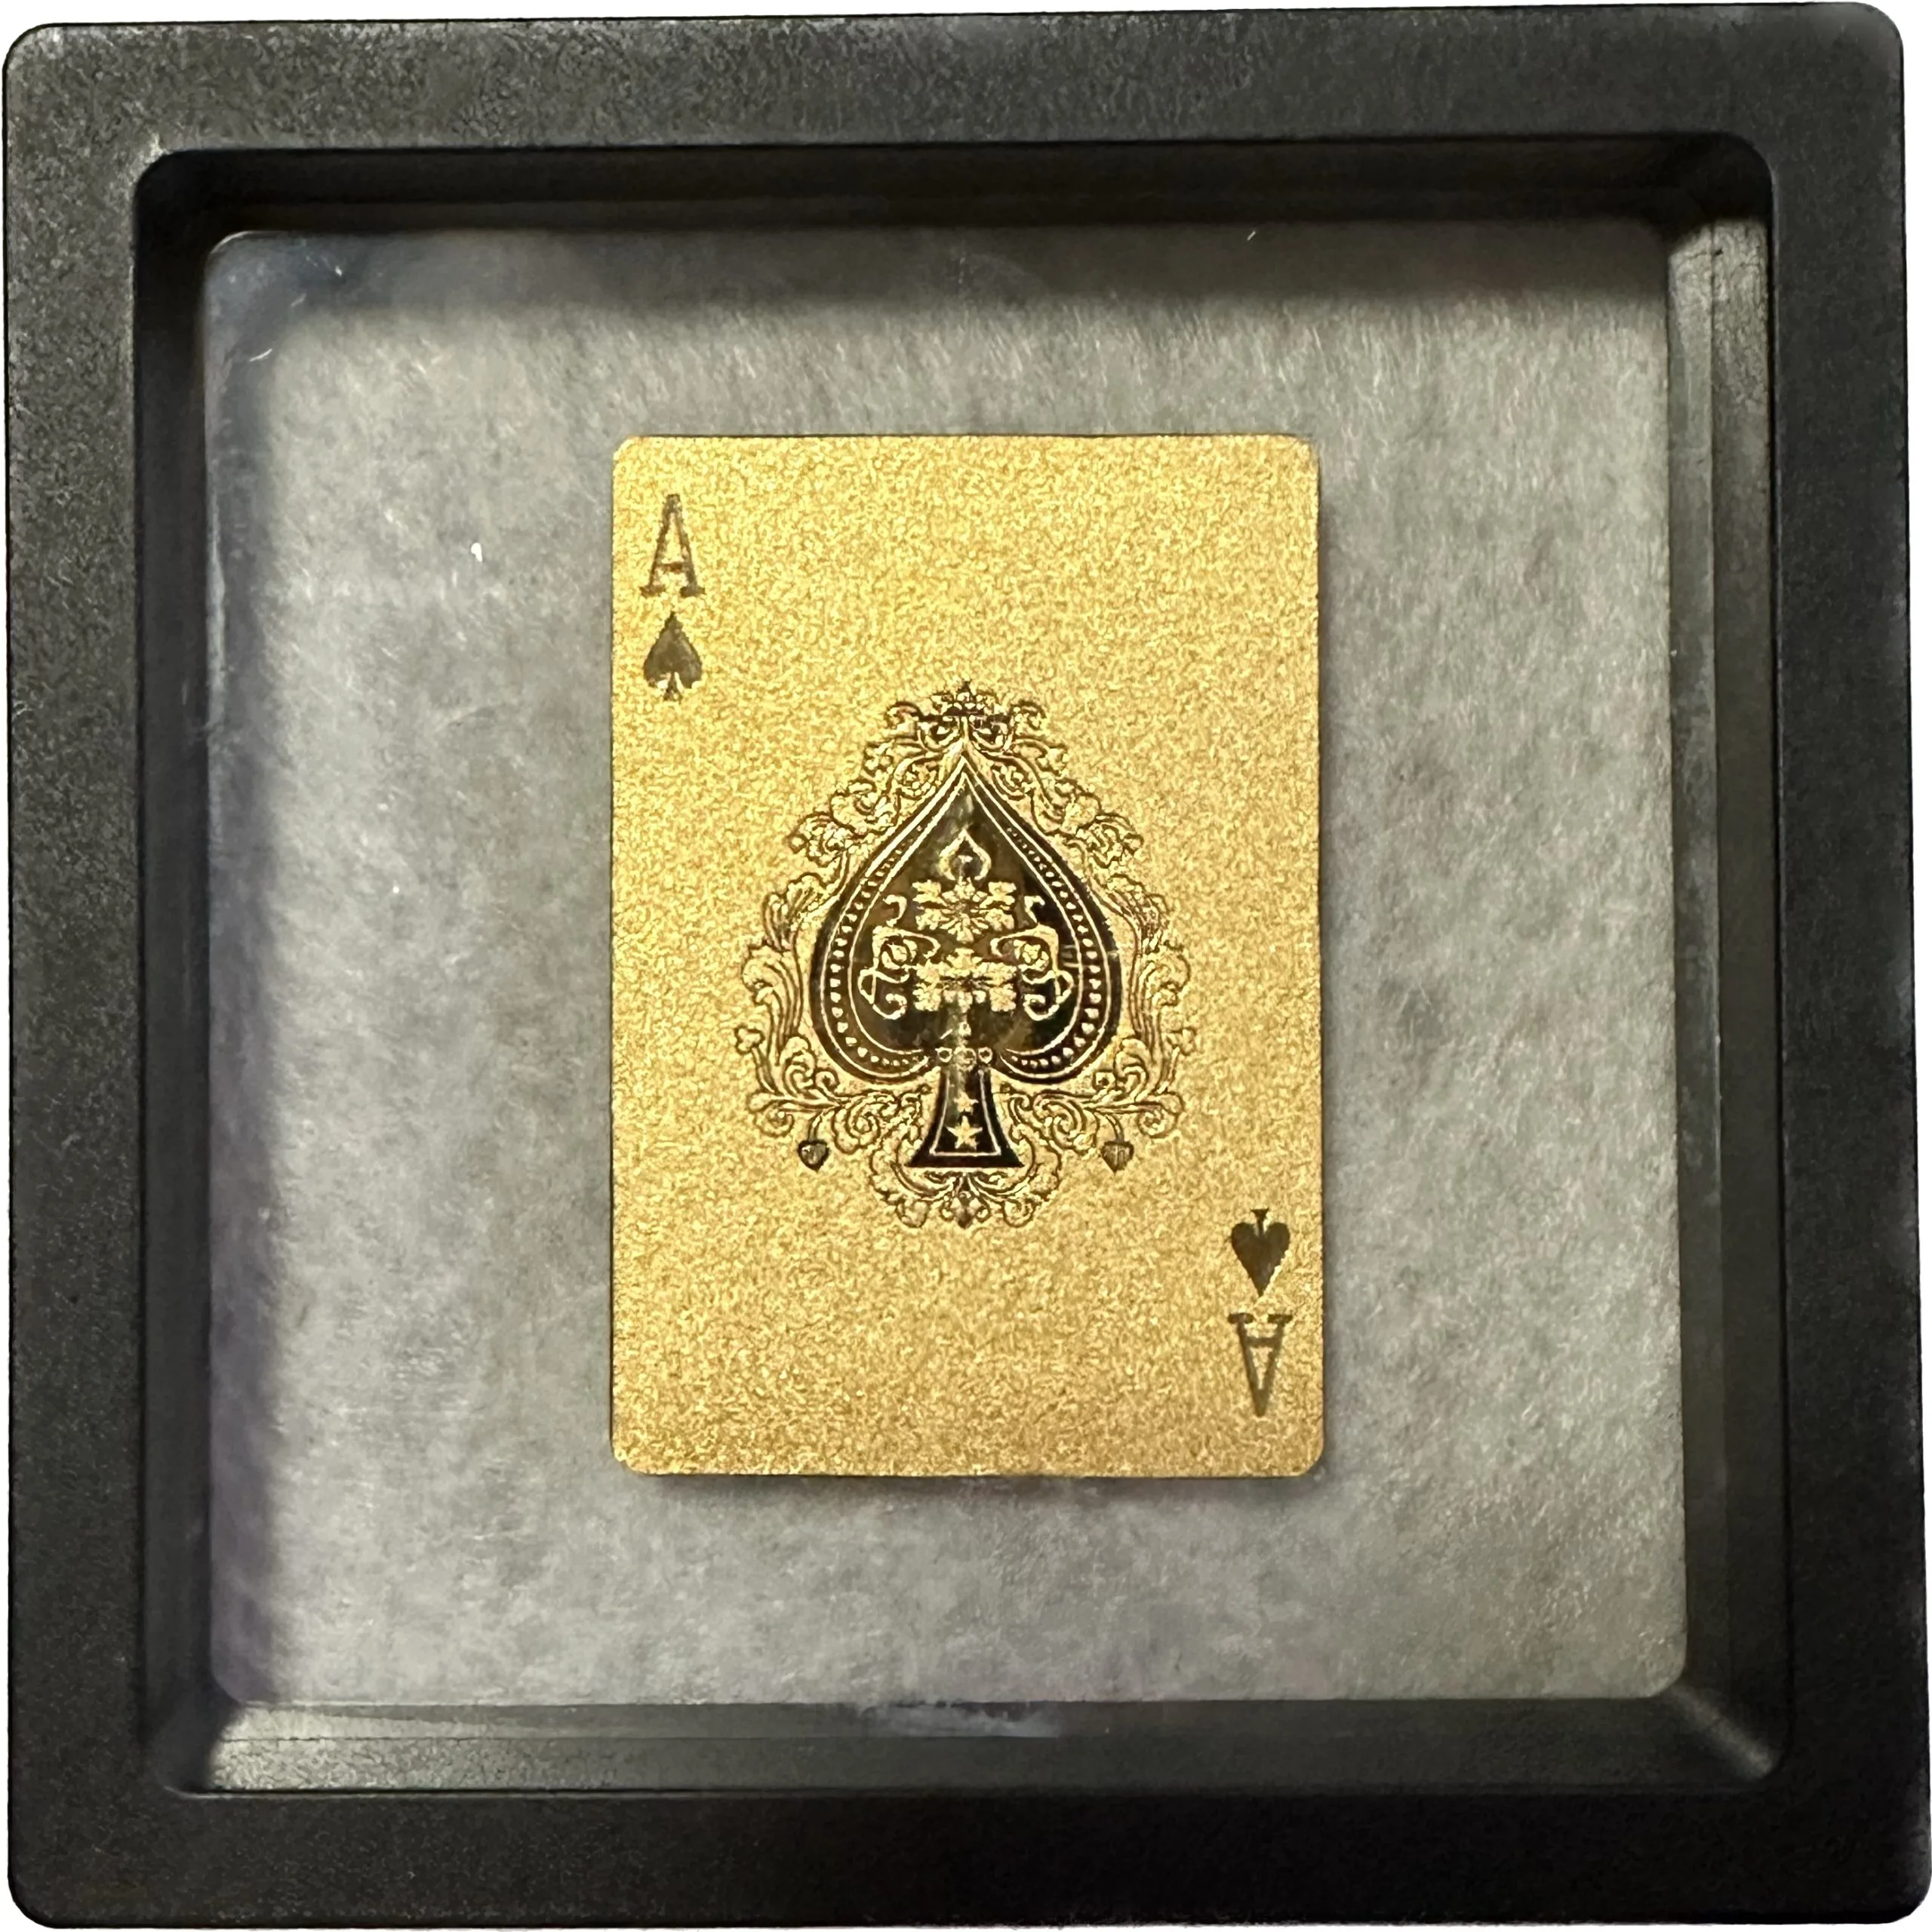 One of a kind 24k gold playing card, RARE